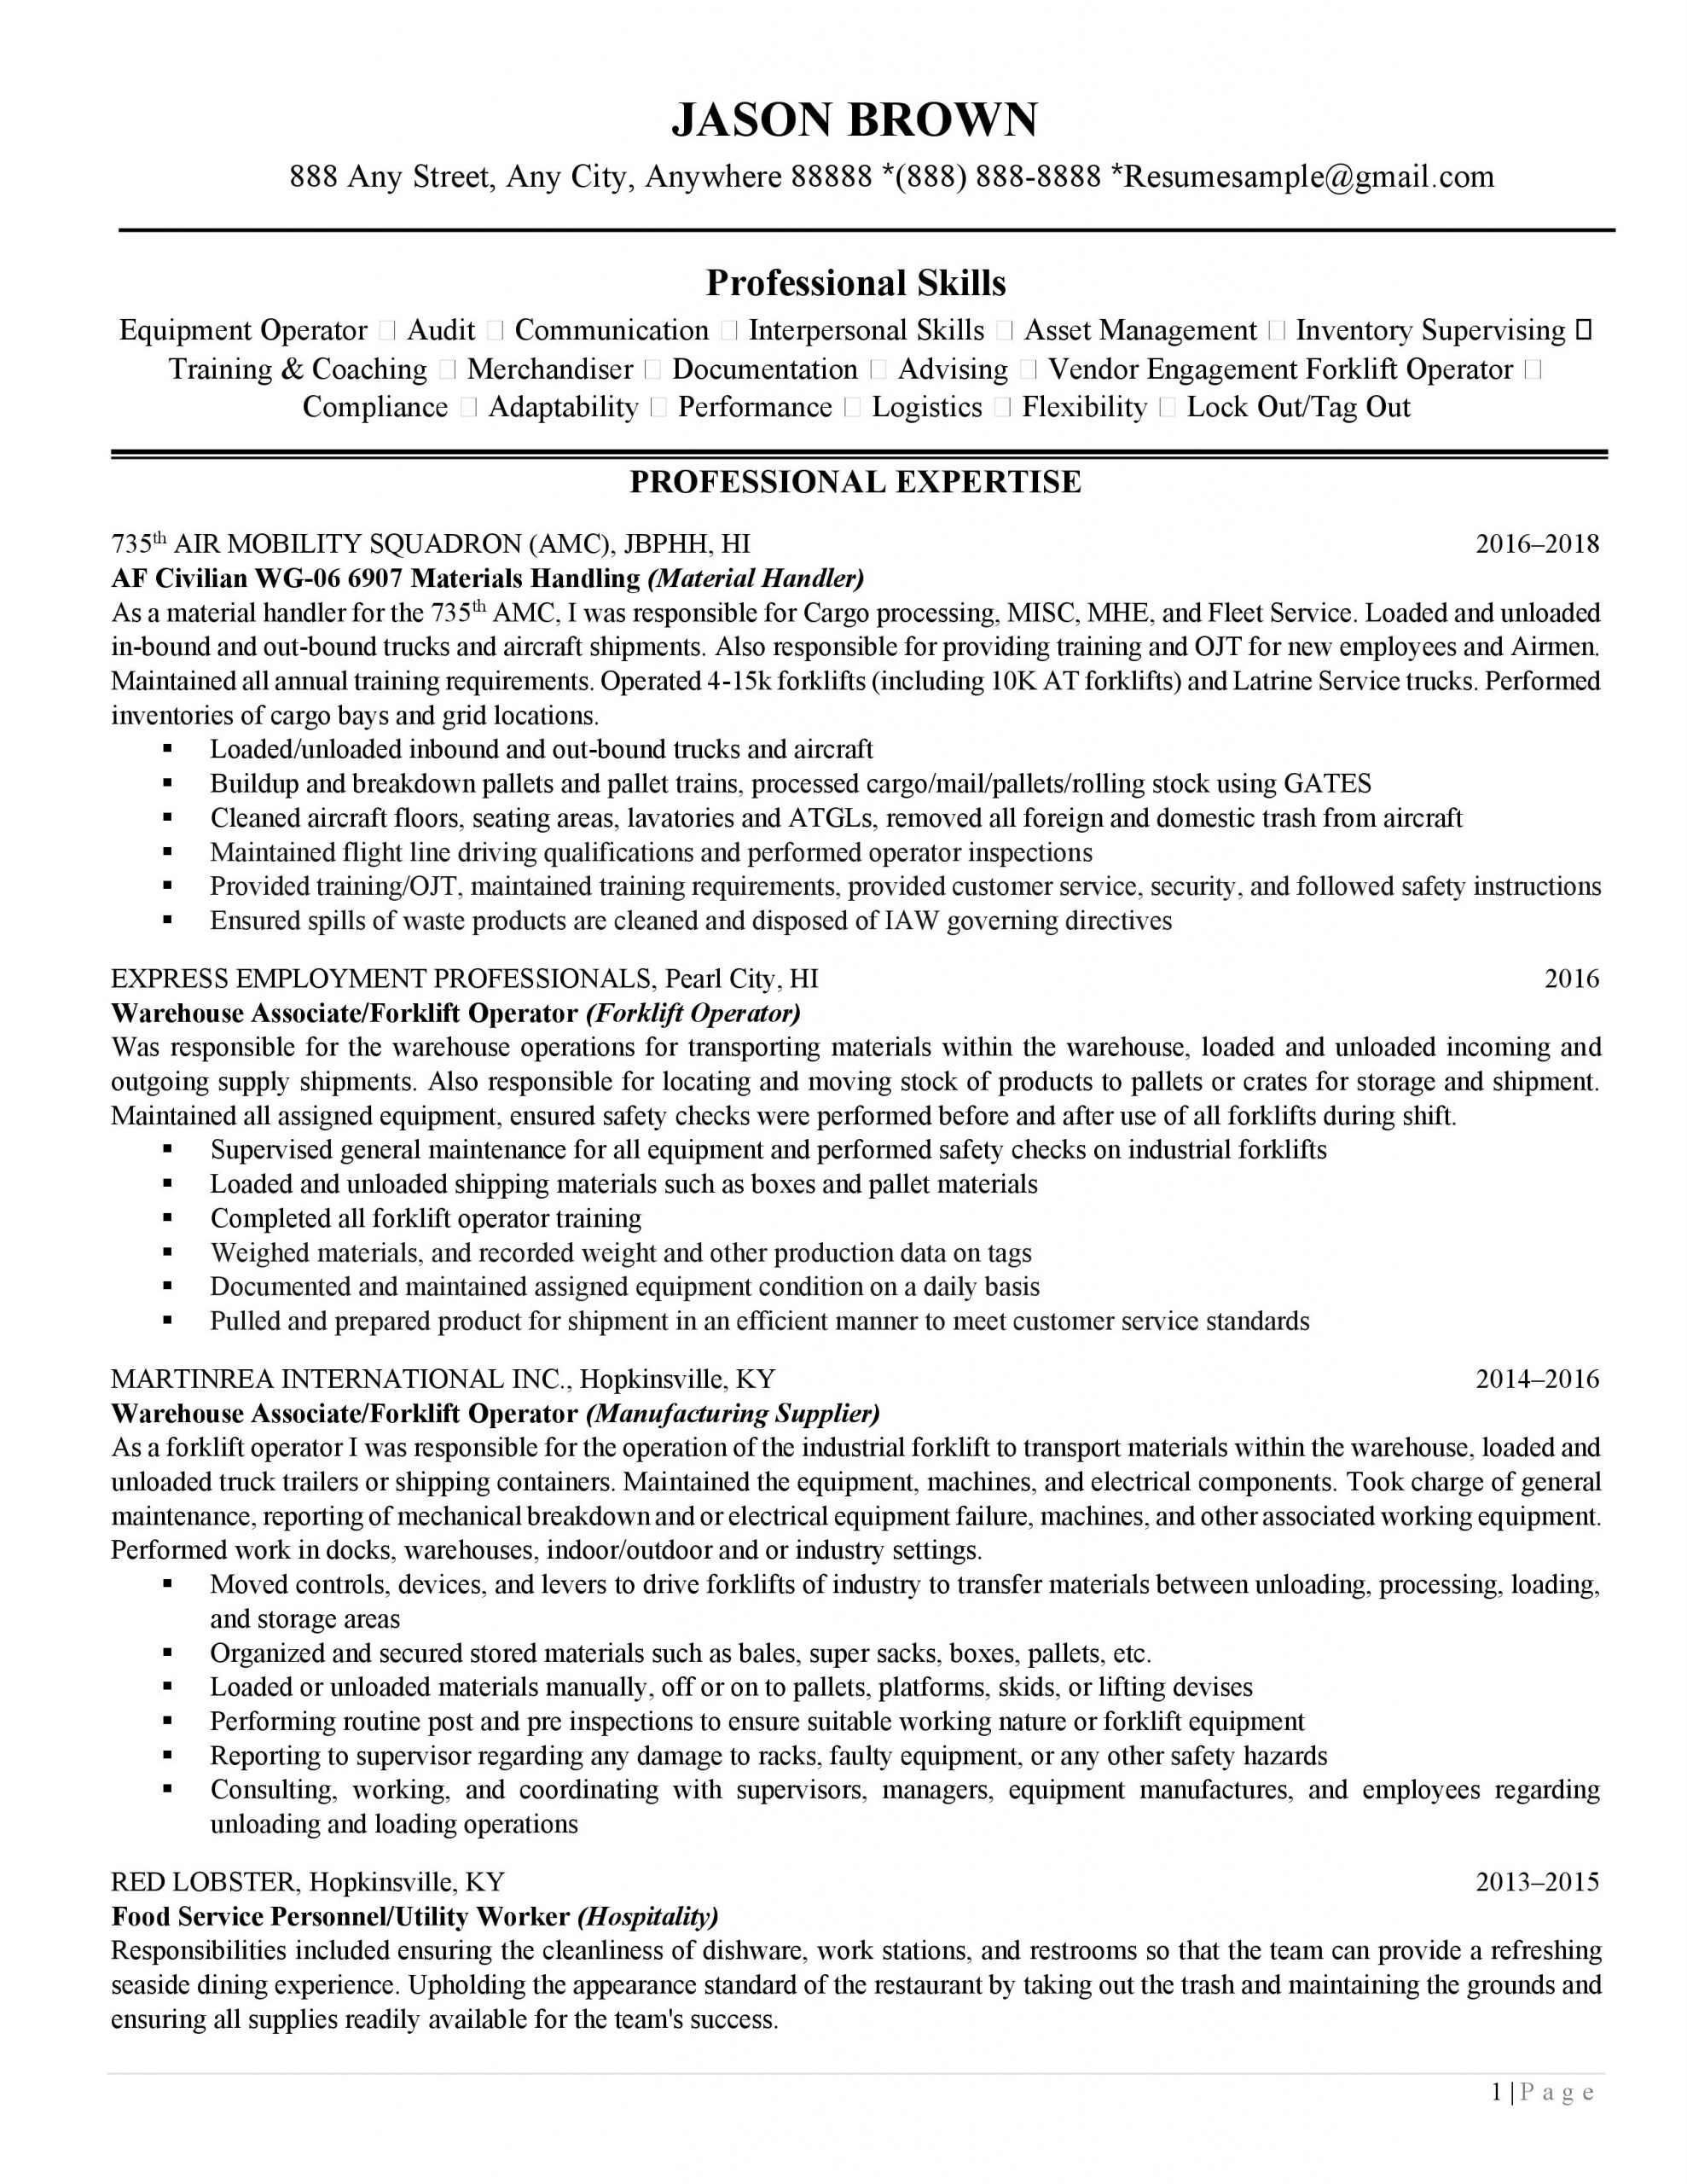 How To Write A Narrative Resume: Page 1 Of A Traditional Resume Example